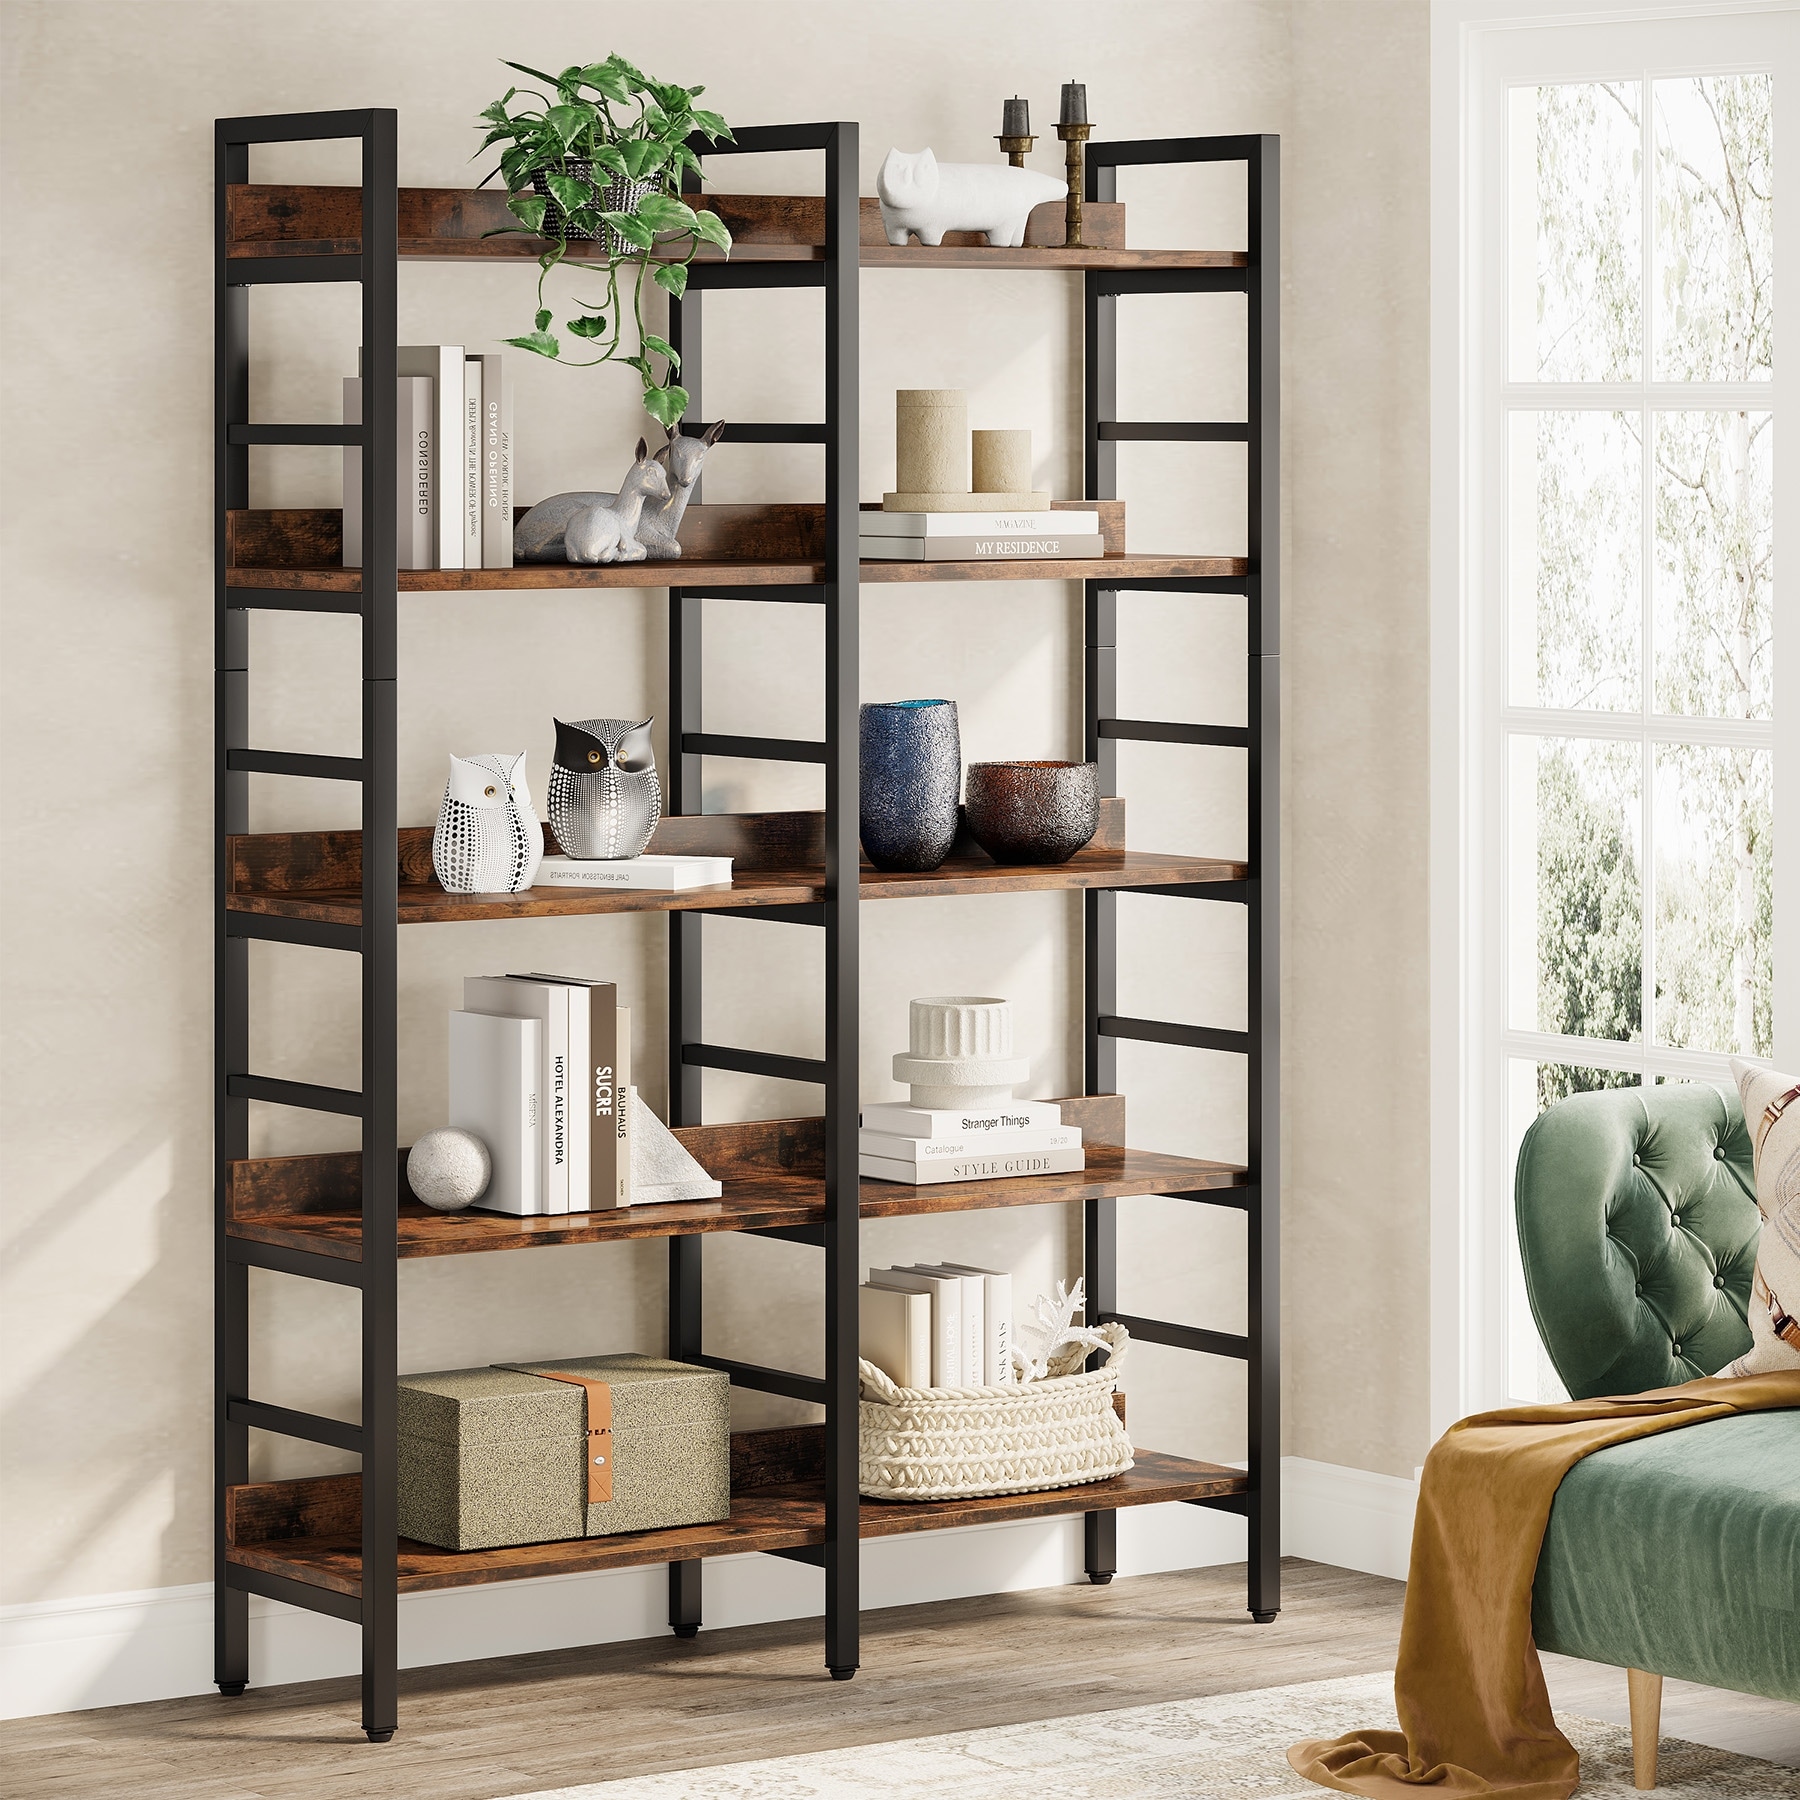 https://ak1.ostkcdn.com/images/products/is/images/direct/db4978ed627e4a018589aabee1873320d560e495/5-Tier-Industrial-Bookshelf-Etagere-Bookcase-Free-Standing-Wide-Book-Shelf-71%E2%80%9DH-x-47%E2%80%9DW.jpg